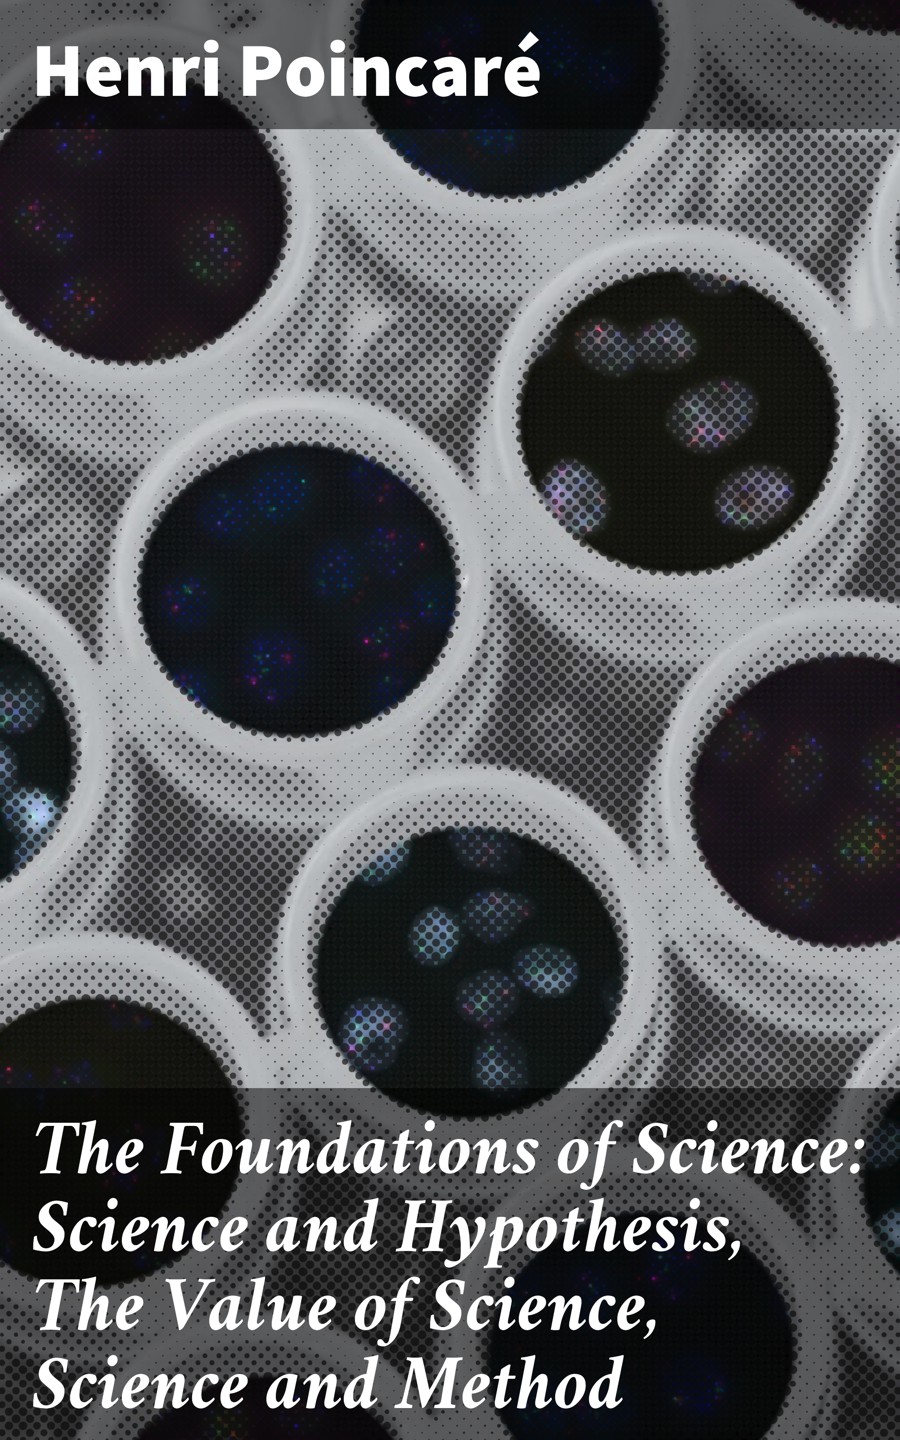 Henri Poincare The Foundations of Science: Science and Hypothesis, The Value of Science, Science and Method